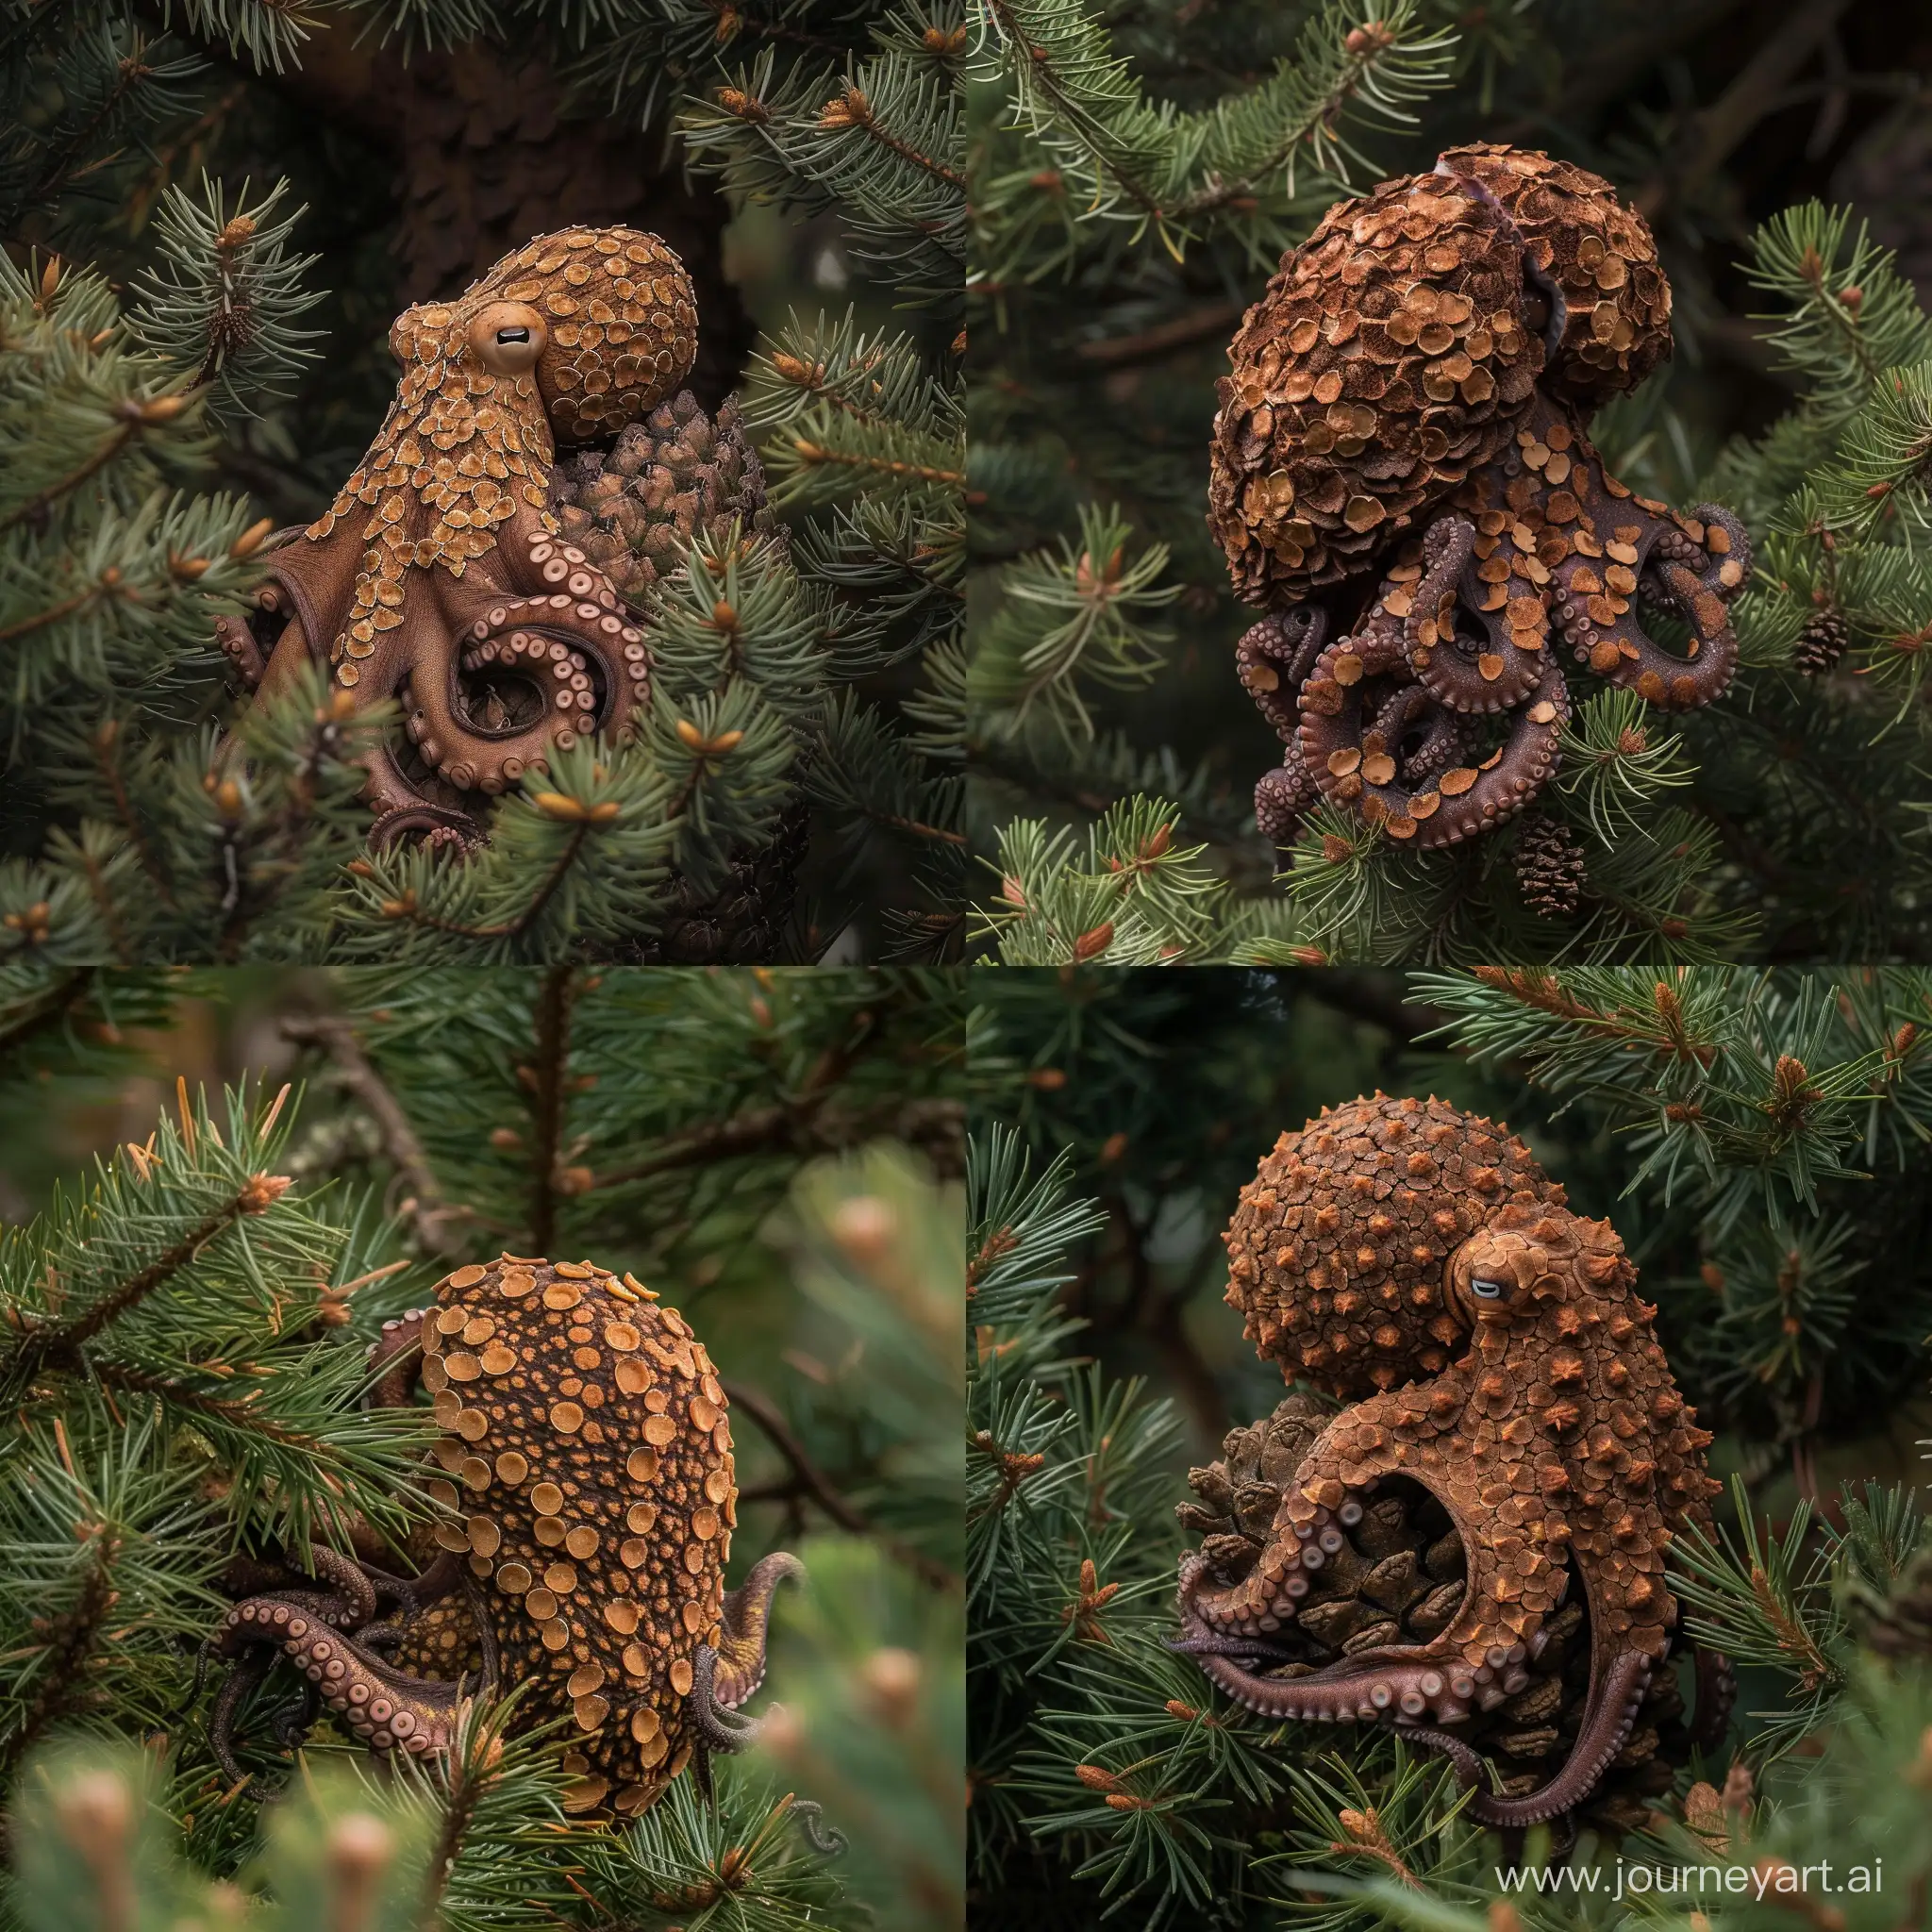 Mottled-Brown-Scaly-Octopus-Camouflaged-in-Pinecone-Scales